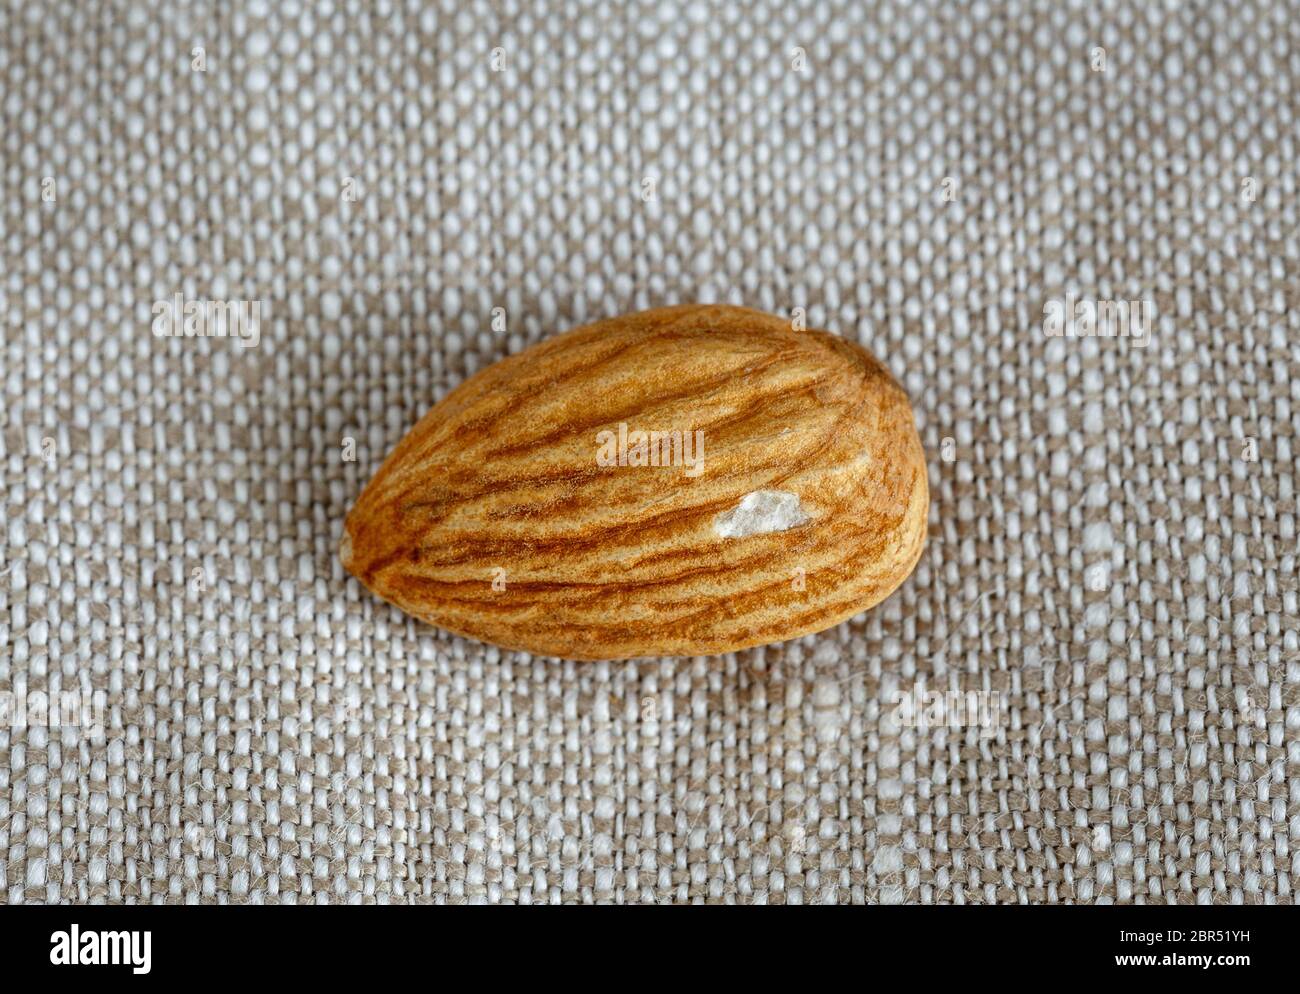 Light brown almond kernel close up Stock Photo